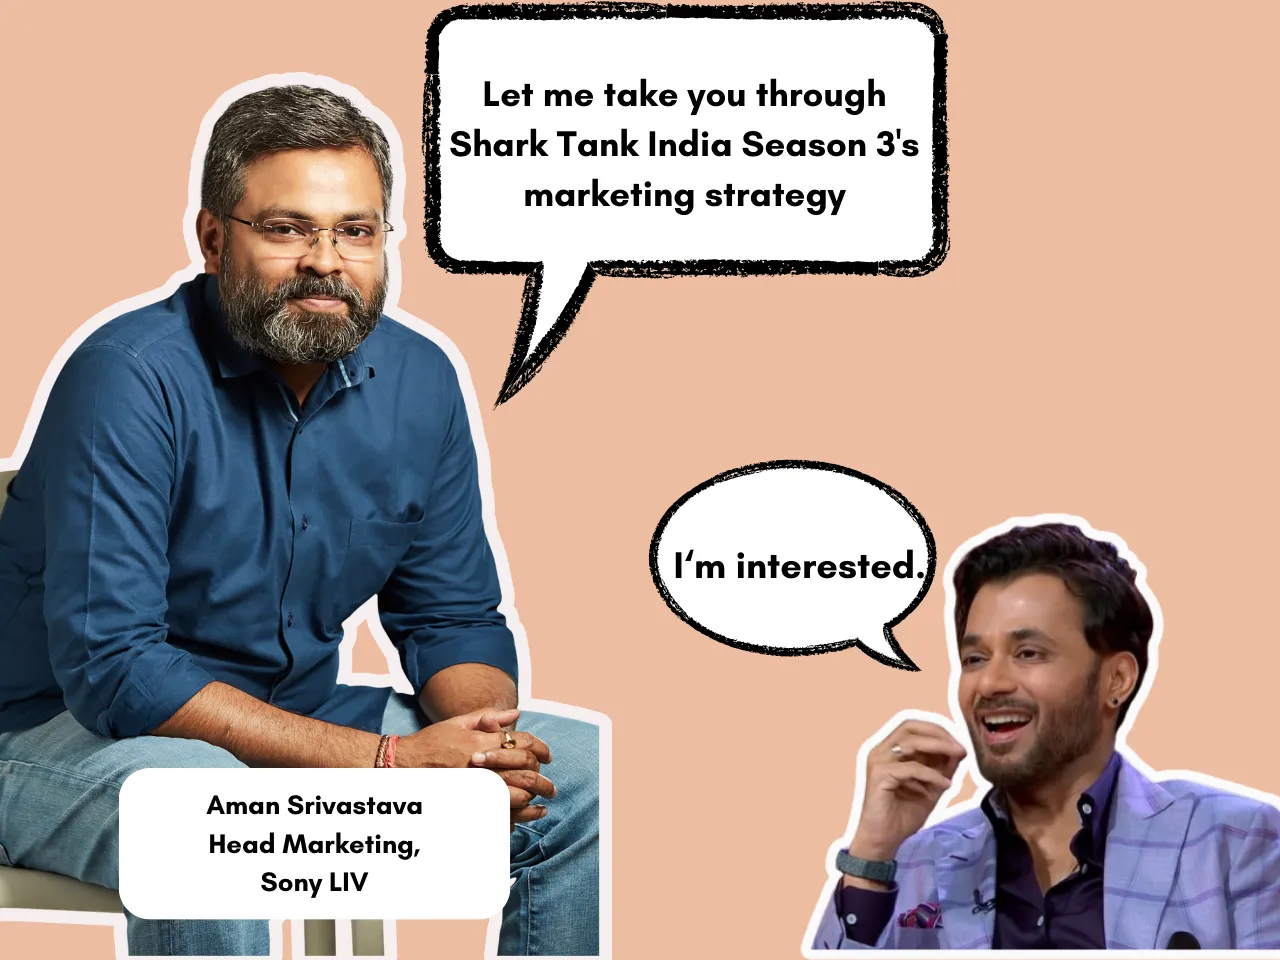 From memes to campus visits, Shark Tank India plans an elaborate marketing campaign for Season 3 launch